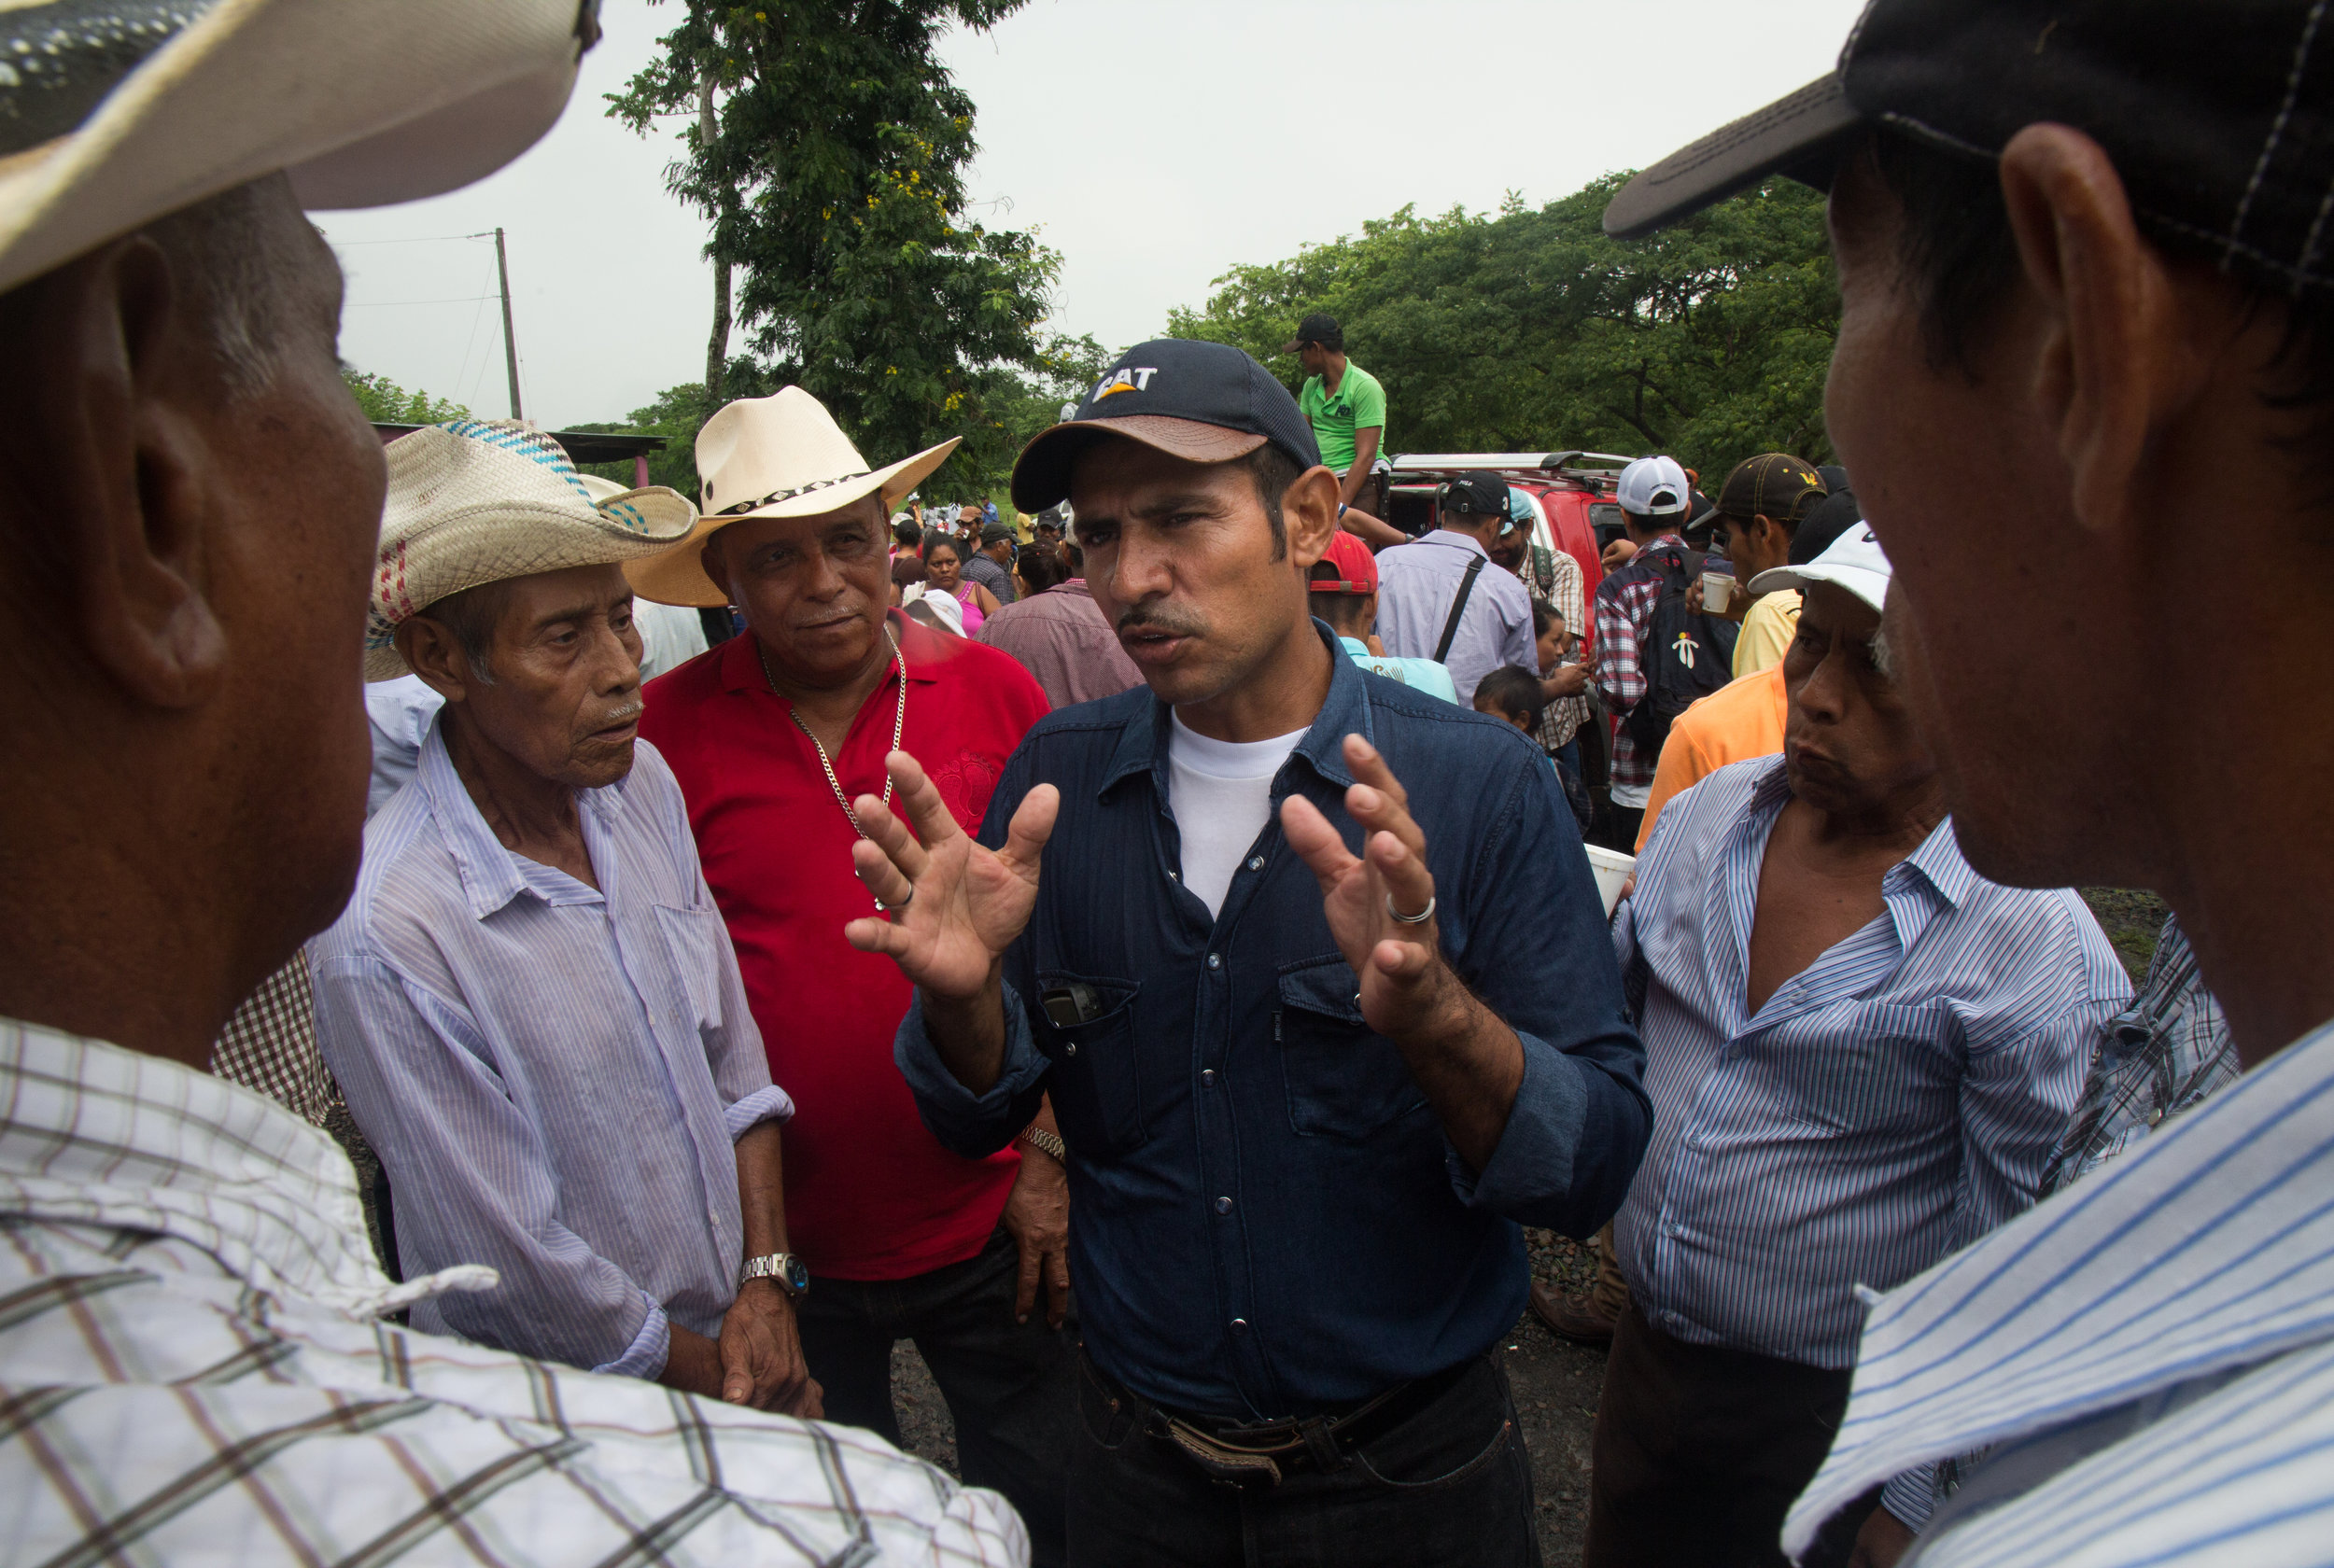  Javier Carmona speaks to fellow campesinos &nbsp;at a protest against the Ley 840 and the Nicaraguan Canal project which could expropriate tens of thousands of families' property's most of whom are small farmers, or campesinos. The protest in El Tul